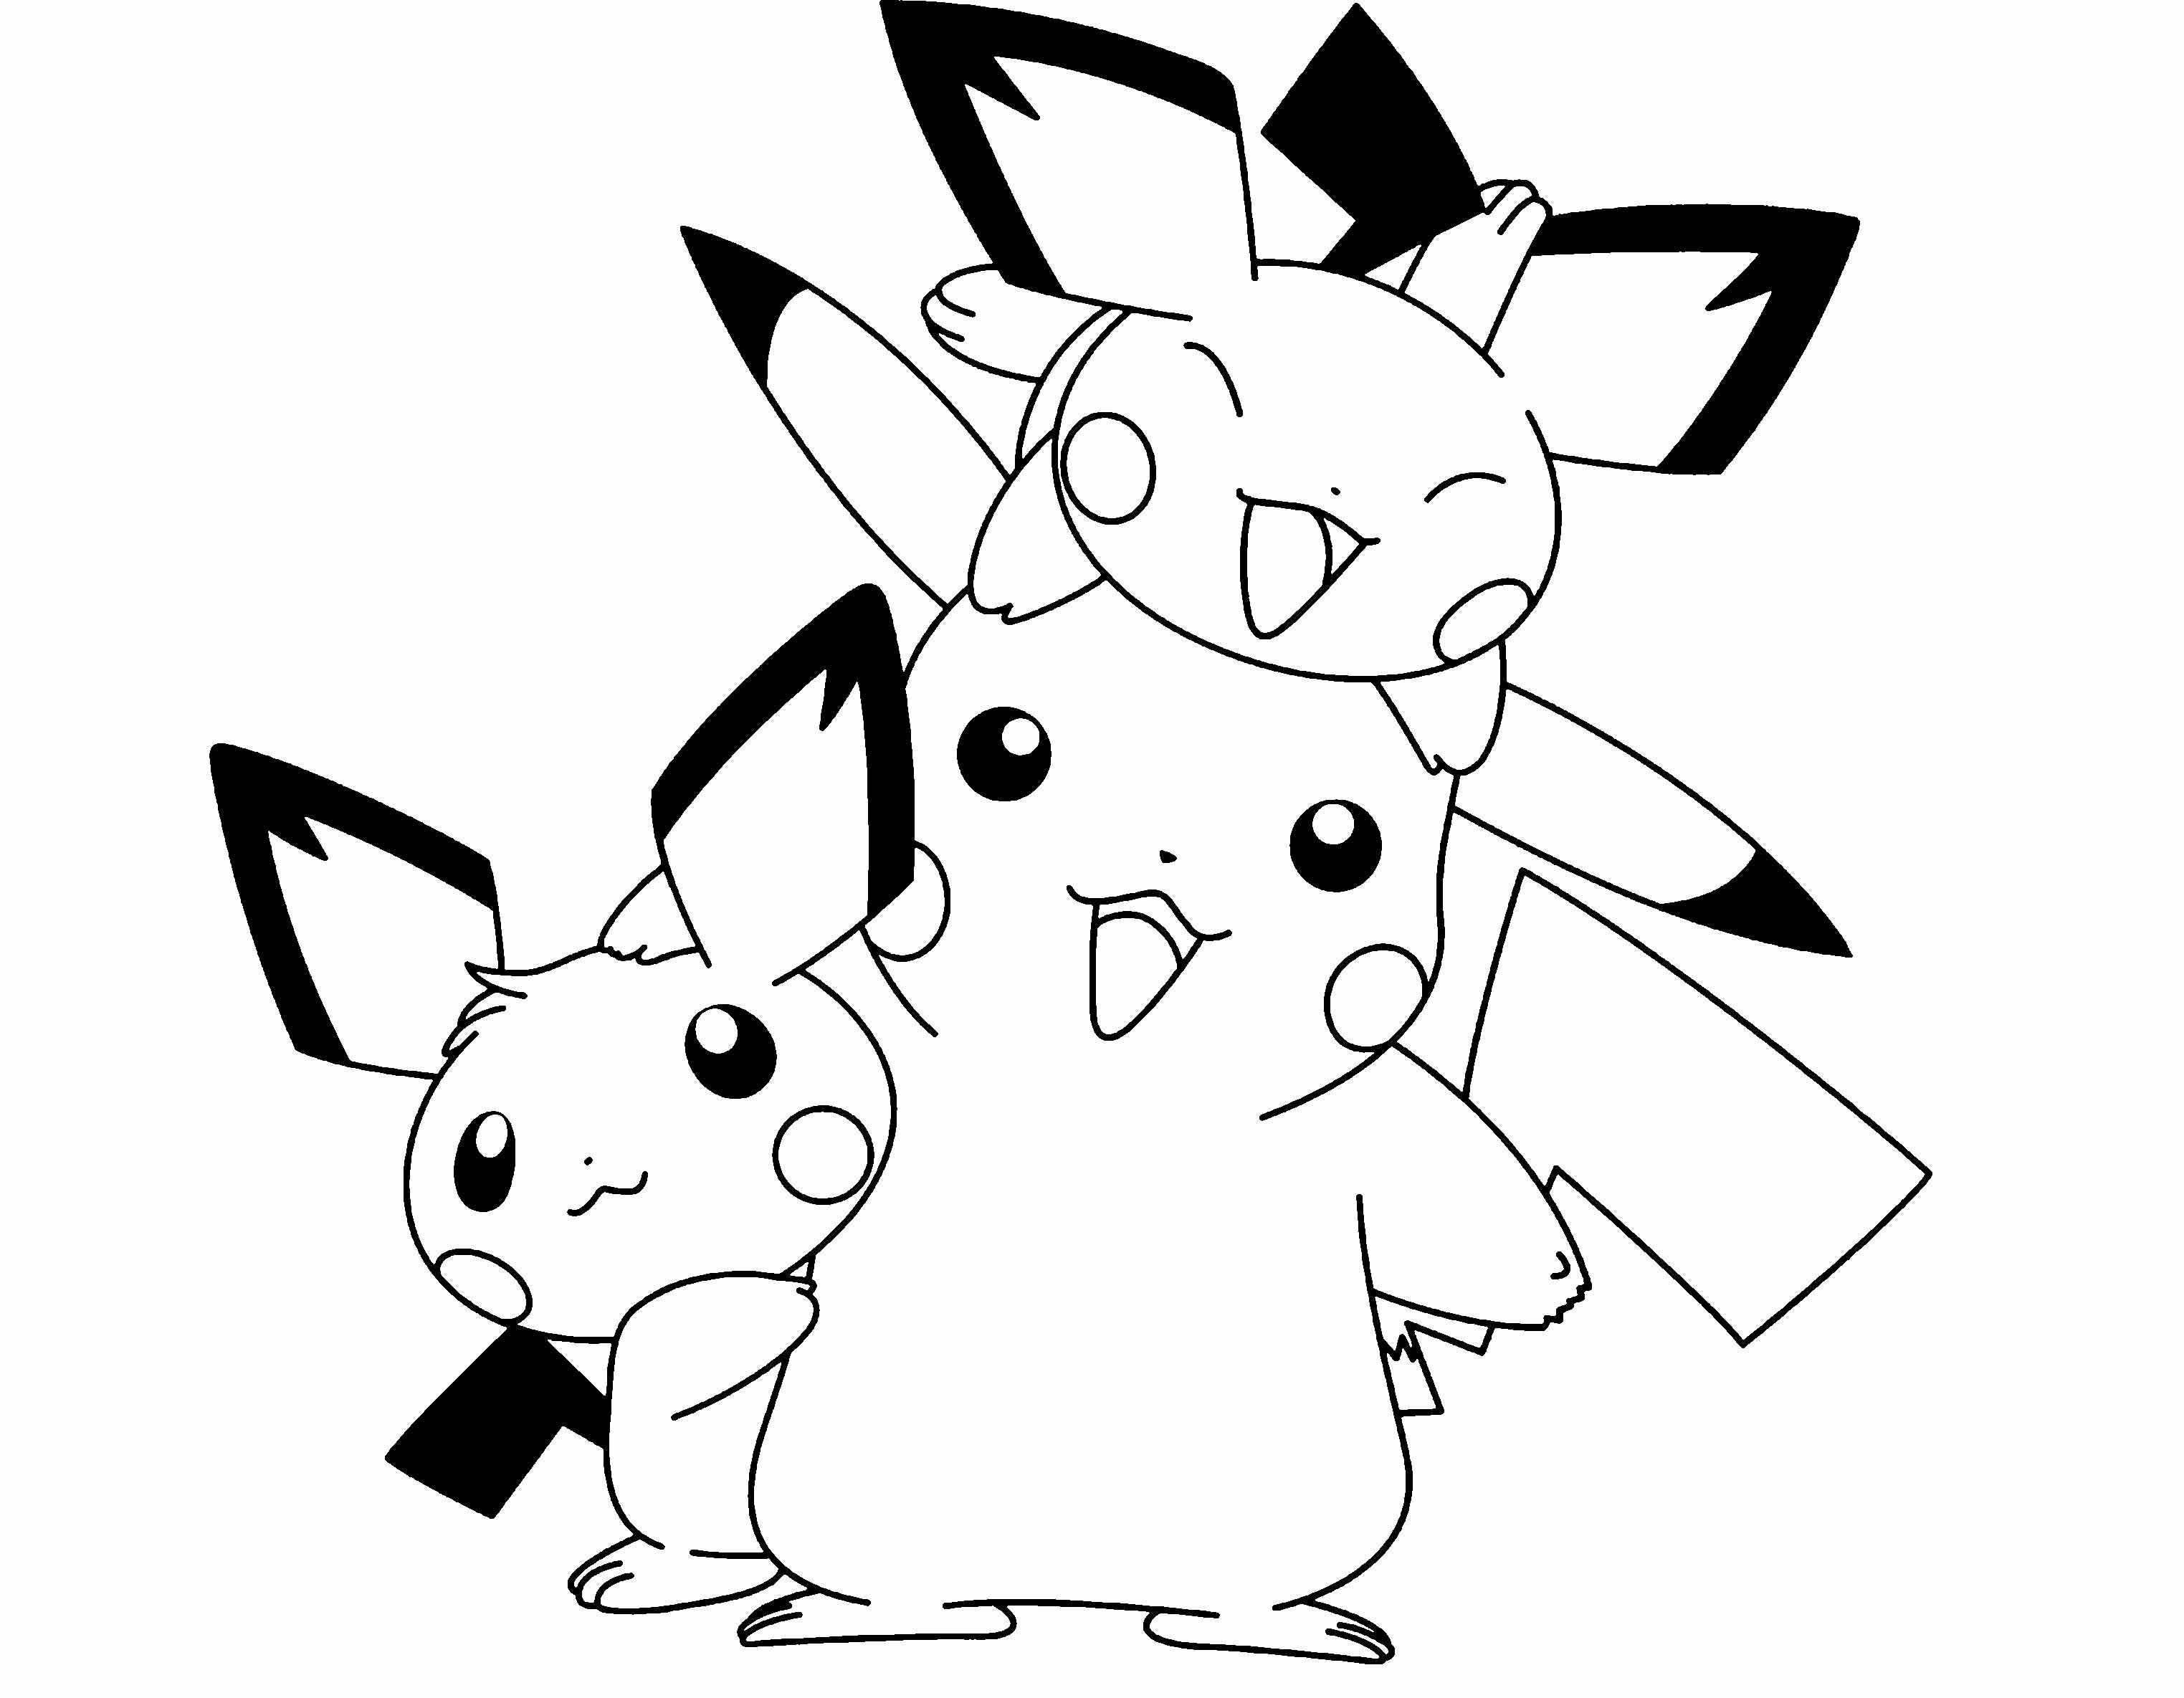 Cute Pikachu Coloring Pages
 Pokemon Pikachu And Two Friends Are Cute Coloring Page